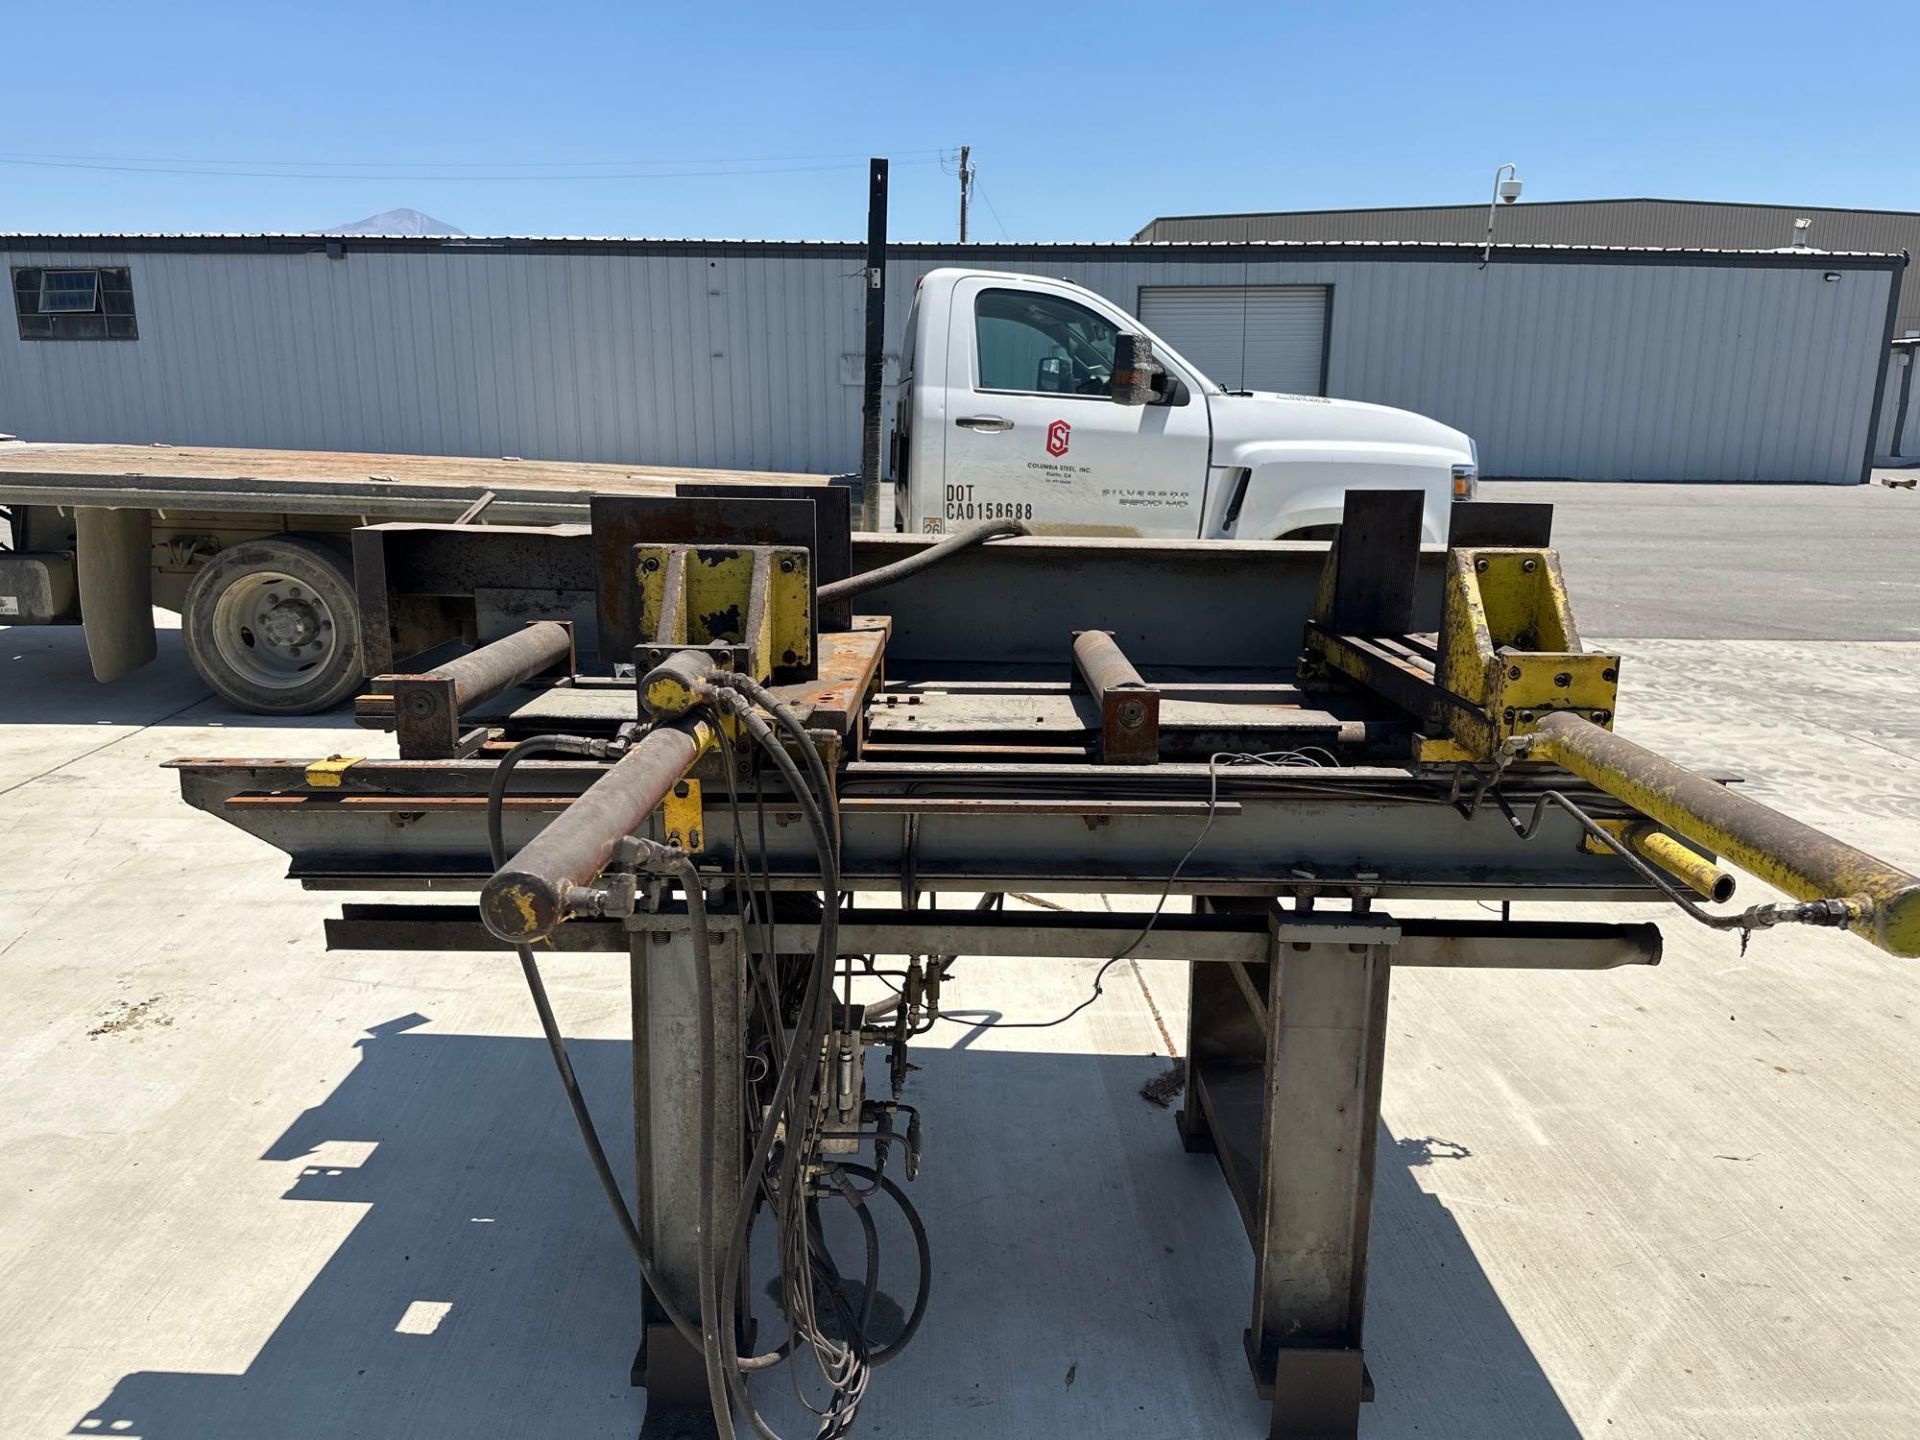 Marvel Series 2150A-PC60 Tilt Frame Vertical Band Saw, 2’ x 7’ Conveyor *Located in Redlands, CA* - Image 24 of 25